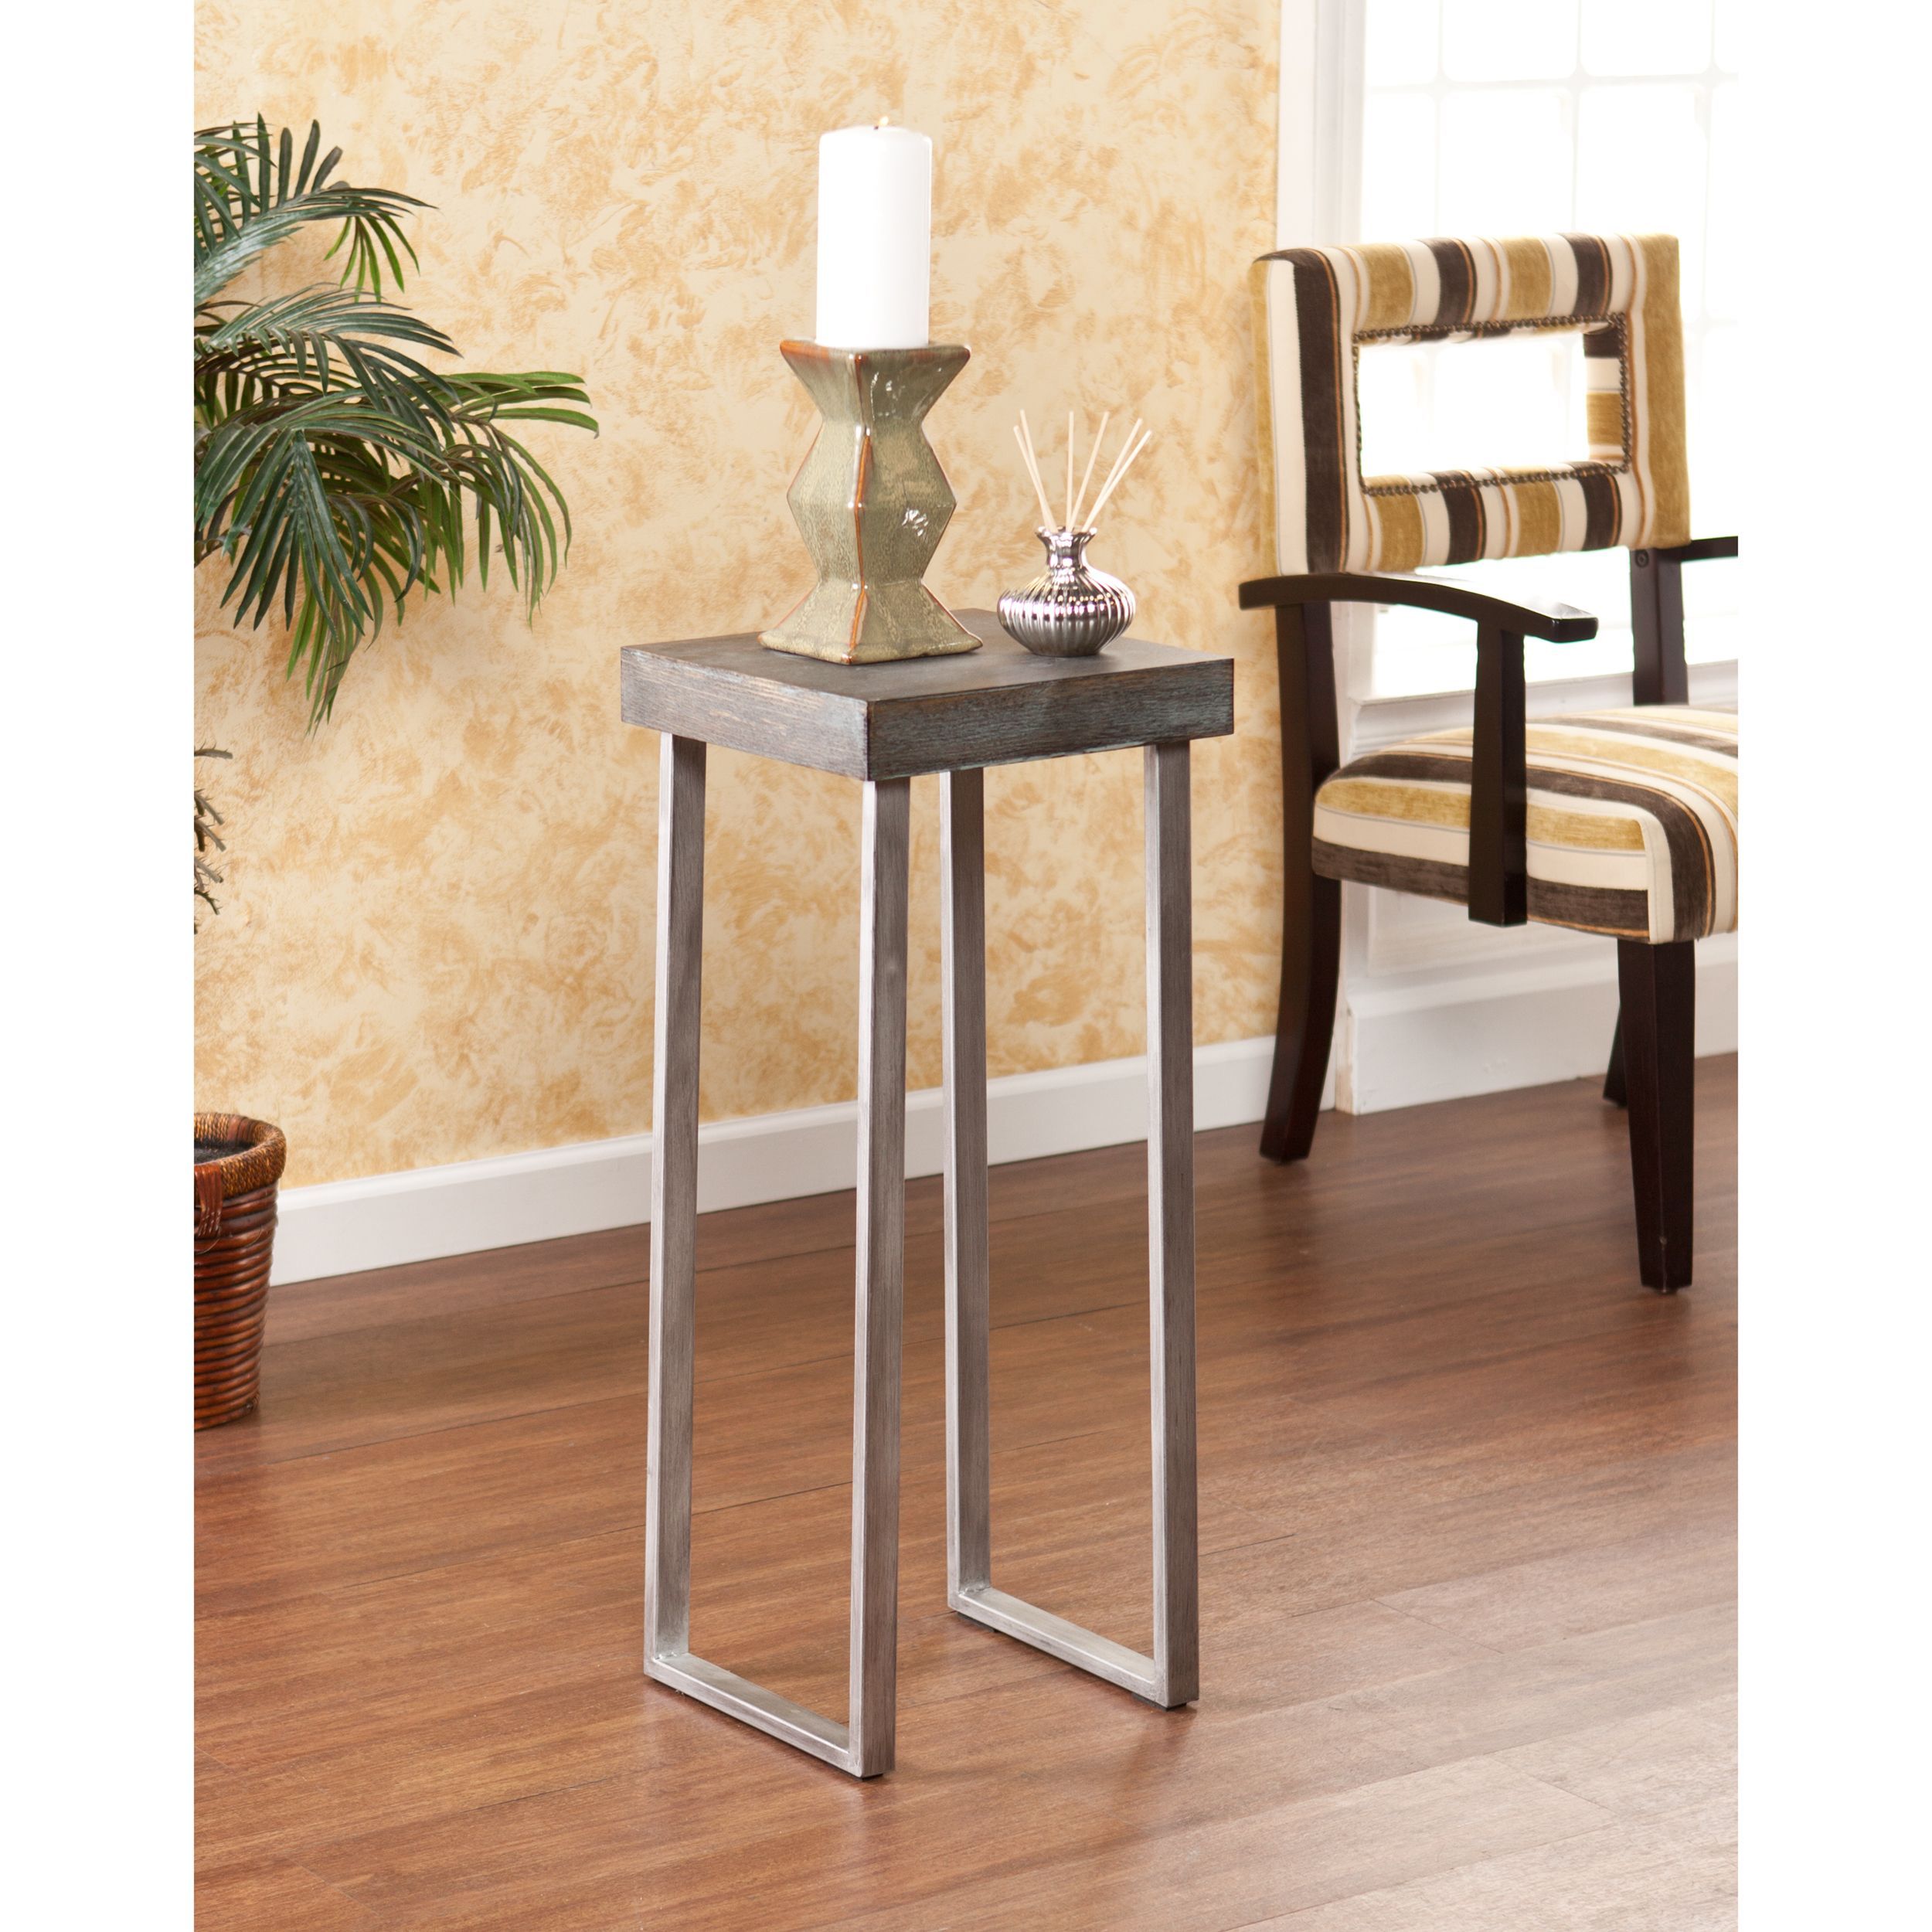 burnt oak finish top with weathered gray look this tall upton pedestal accent table home lumberton lamp has the personality blend many styles living room sets pool and patio